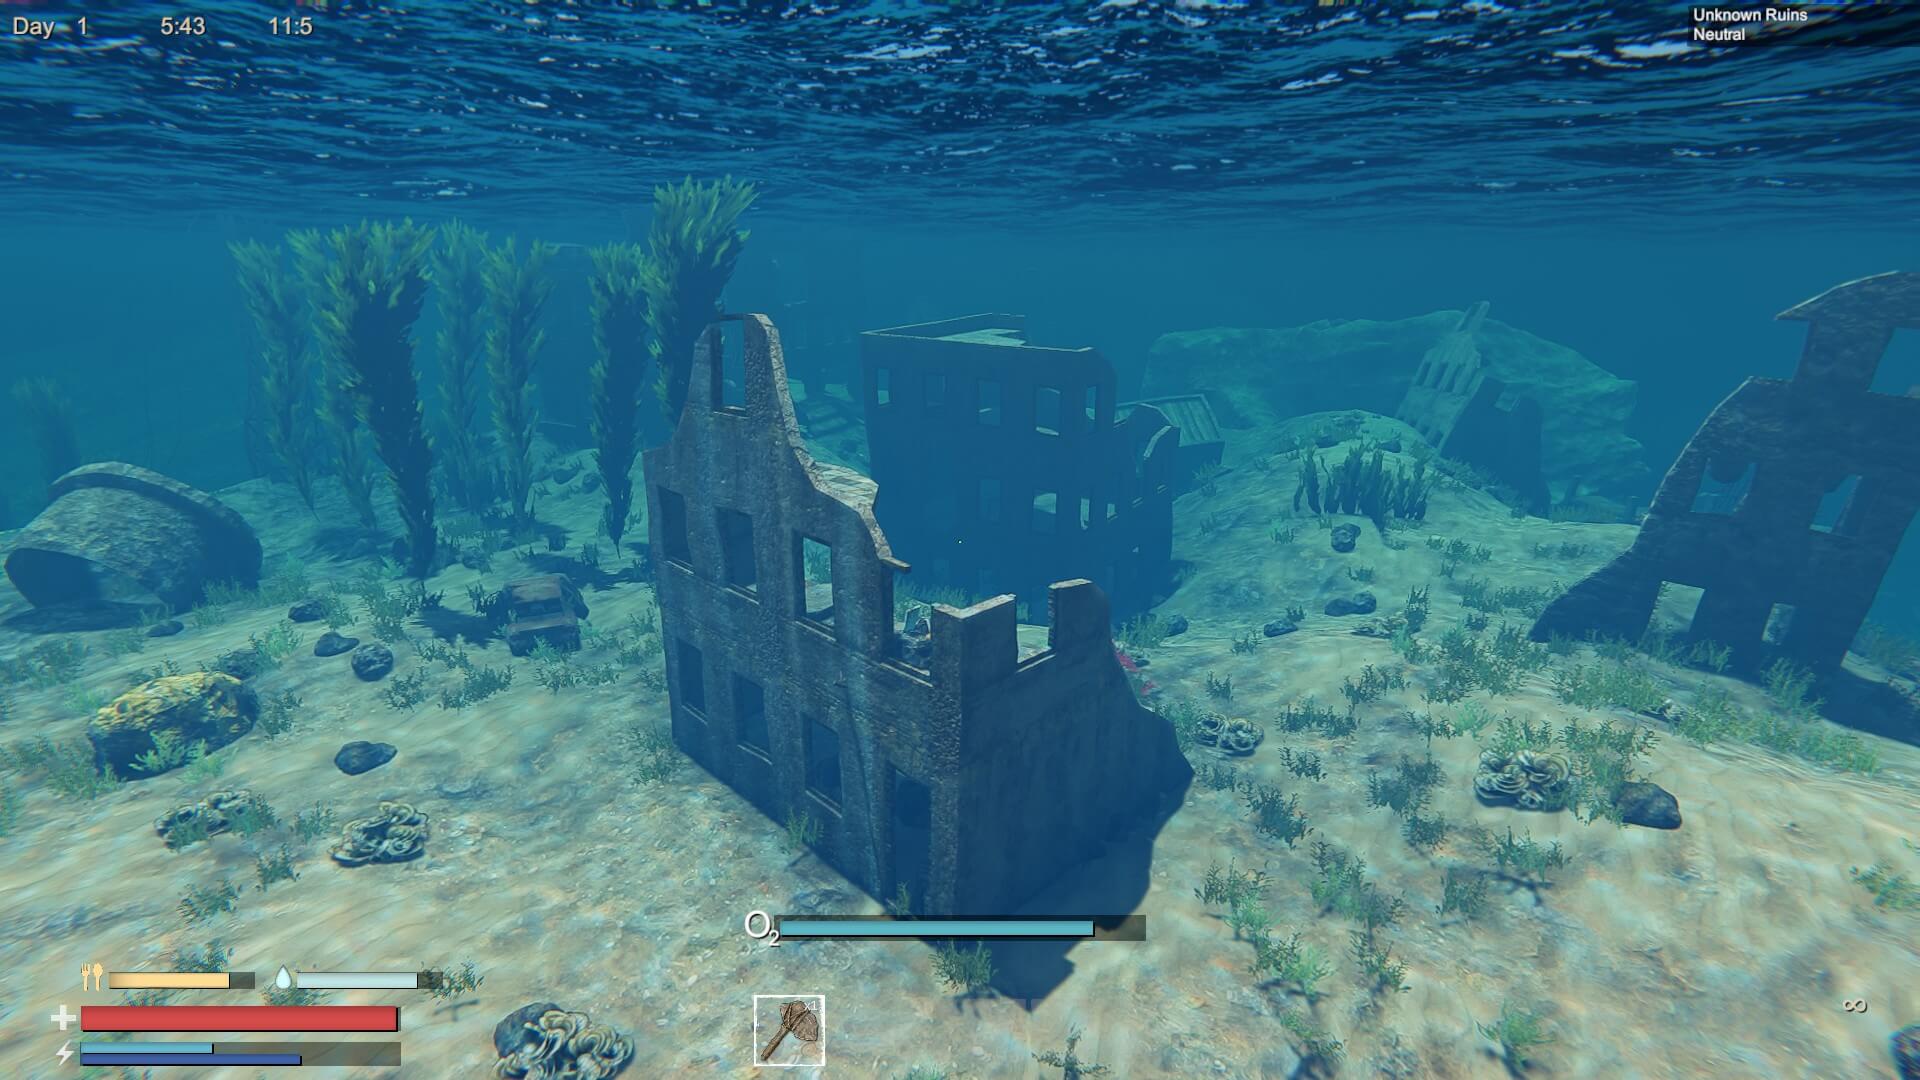 Under the sea in Sunkenland looks beautiful. There are a load of ruins for the player to explore and scavenge from.